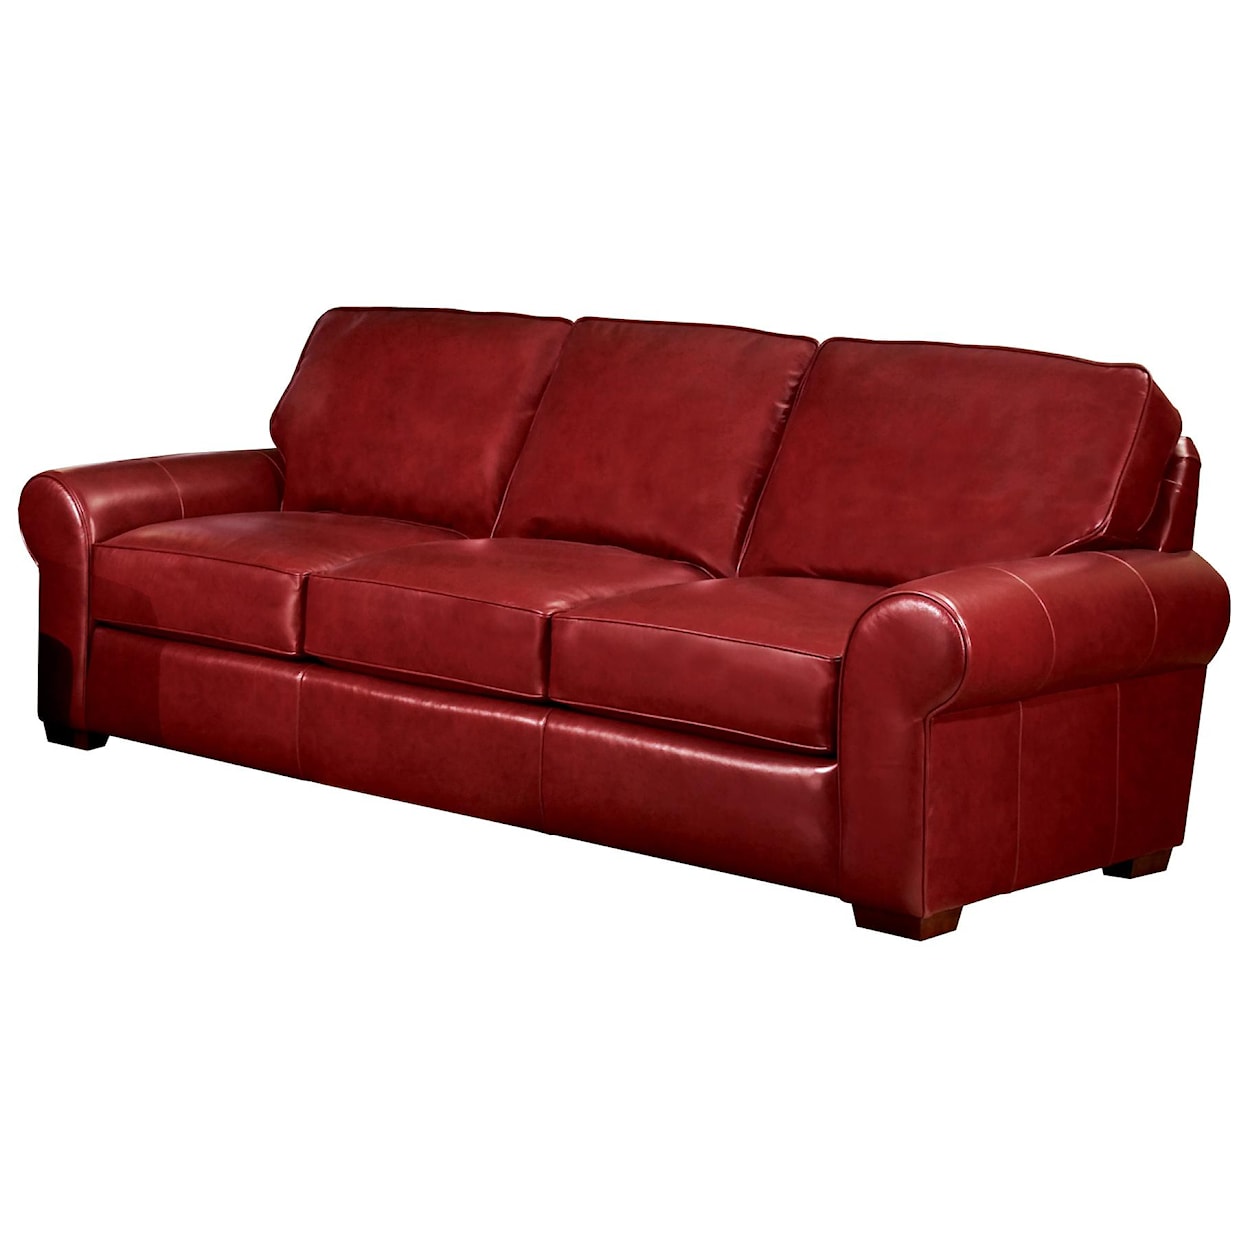 Smith Brothers Build Your Own (8000 Series) Sofa